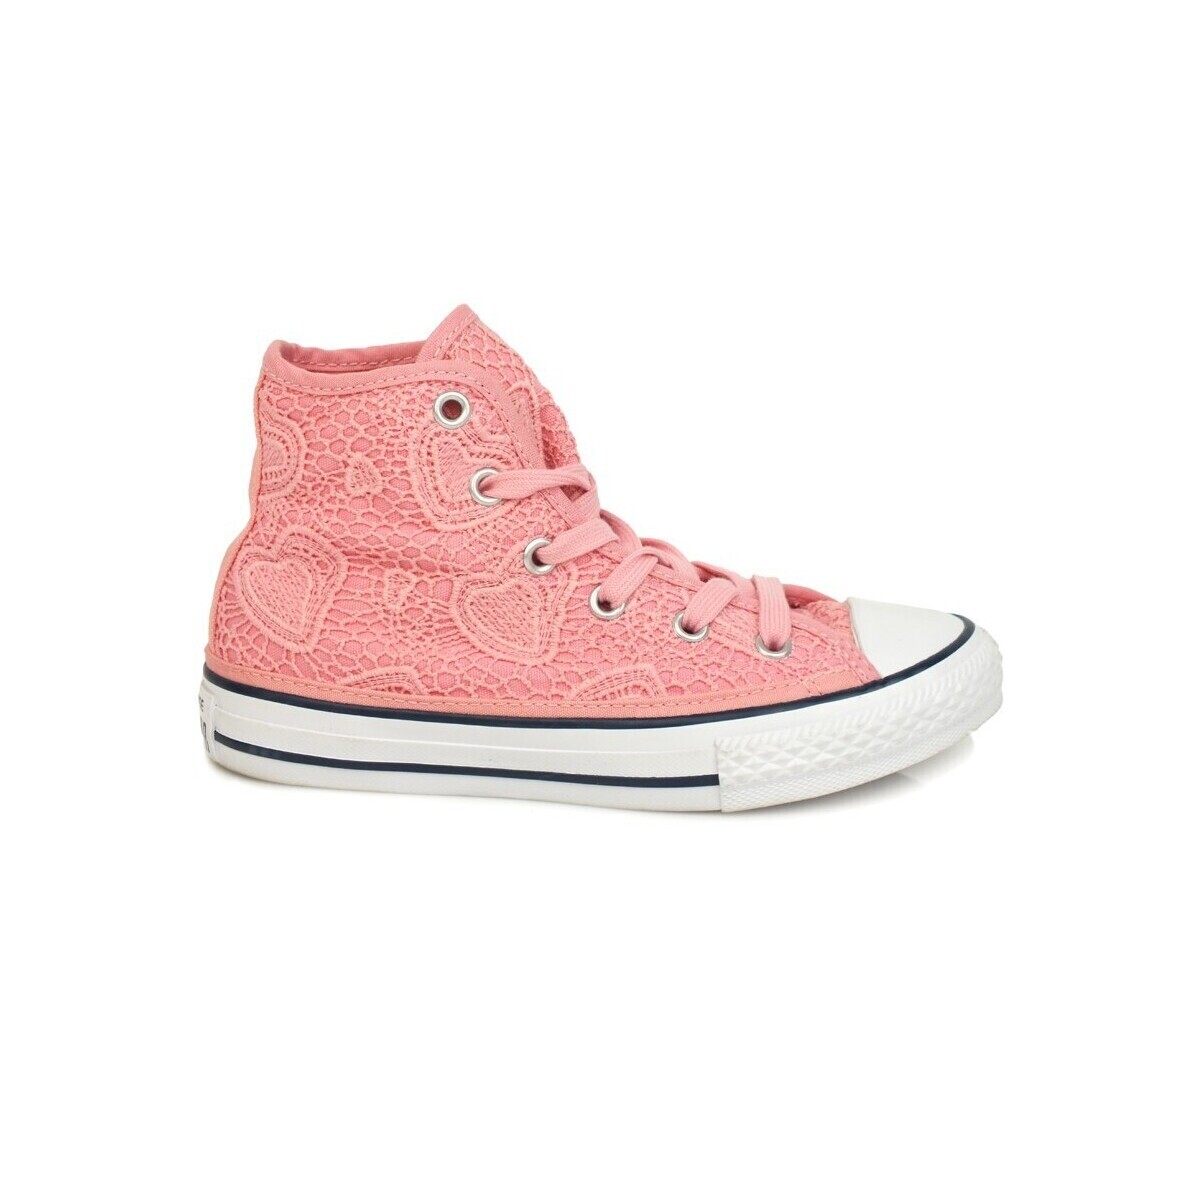 Chaussures Multisport Converse C.T. All Star Pink White 661035C Rose